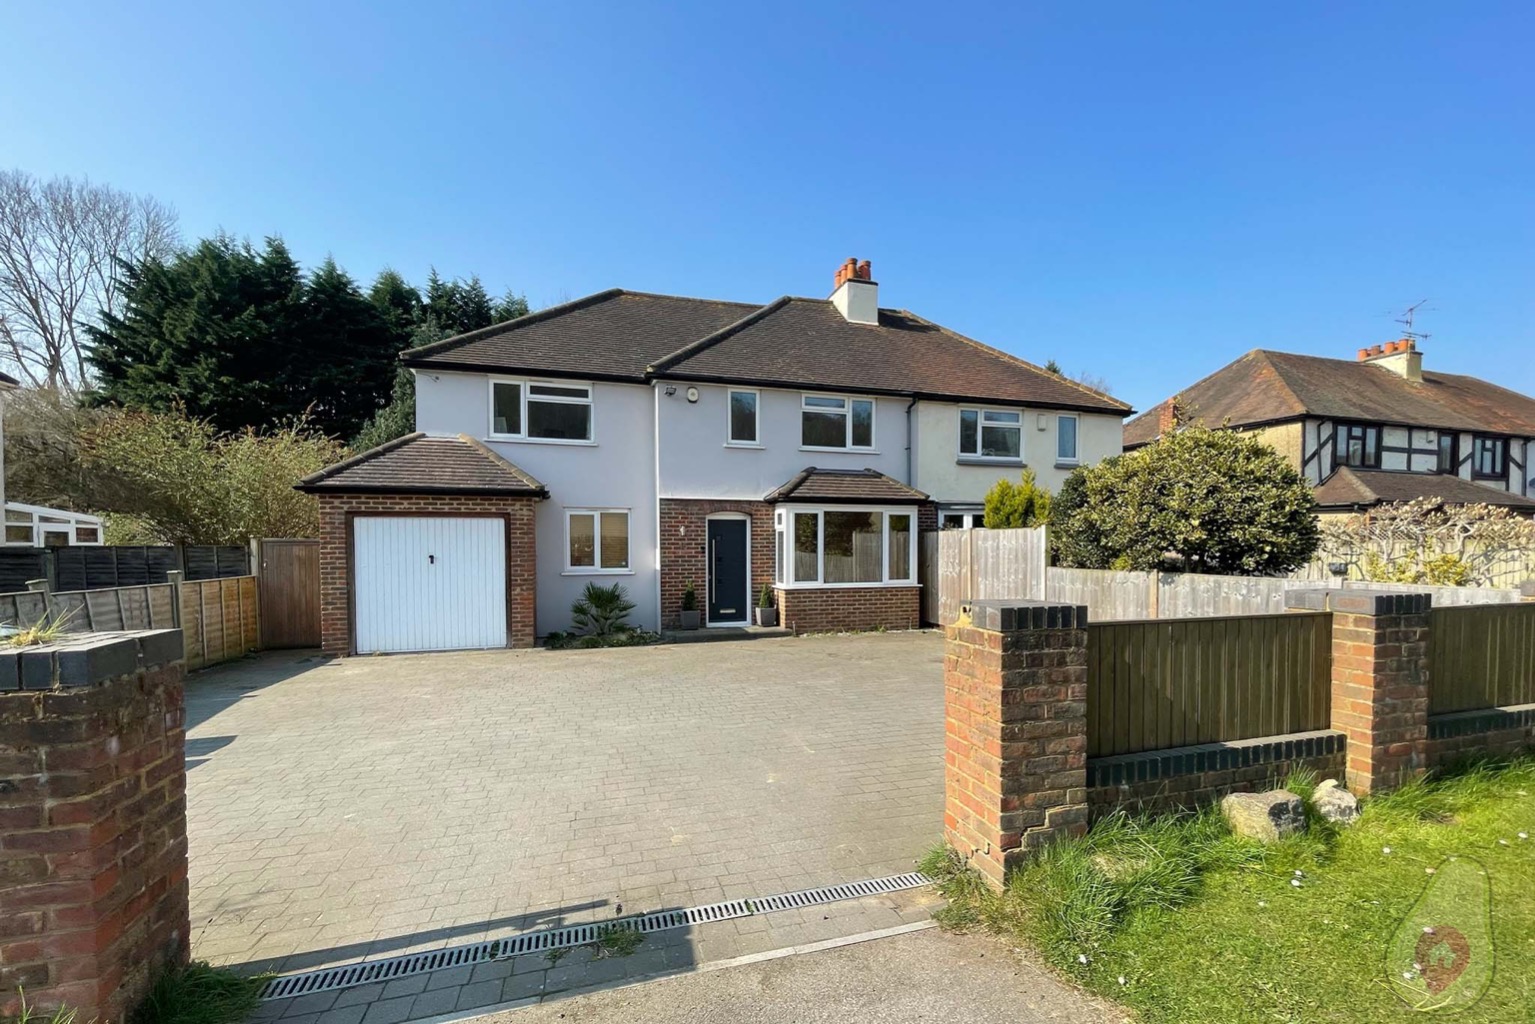 **CHECK OUT THE PROPERTY VIDEO** This is a beautiful four bedroom semi detached home that enjoys views over open countryside to the front and is within the parish of the historic village of West Wycombe. Available with no onward chain.